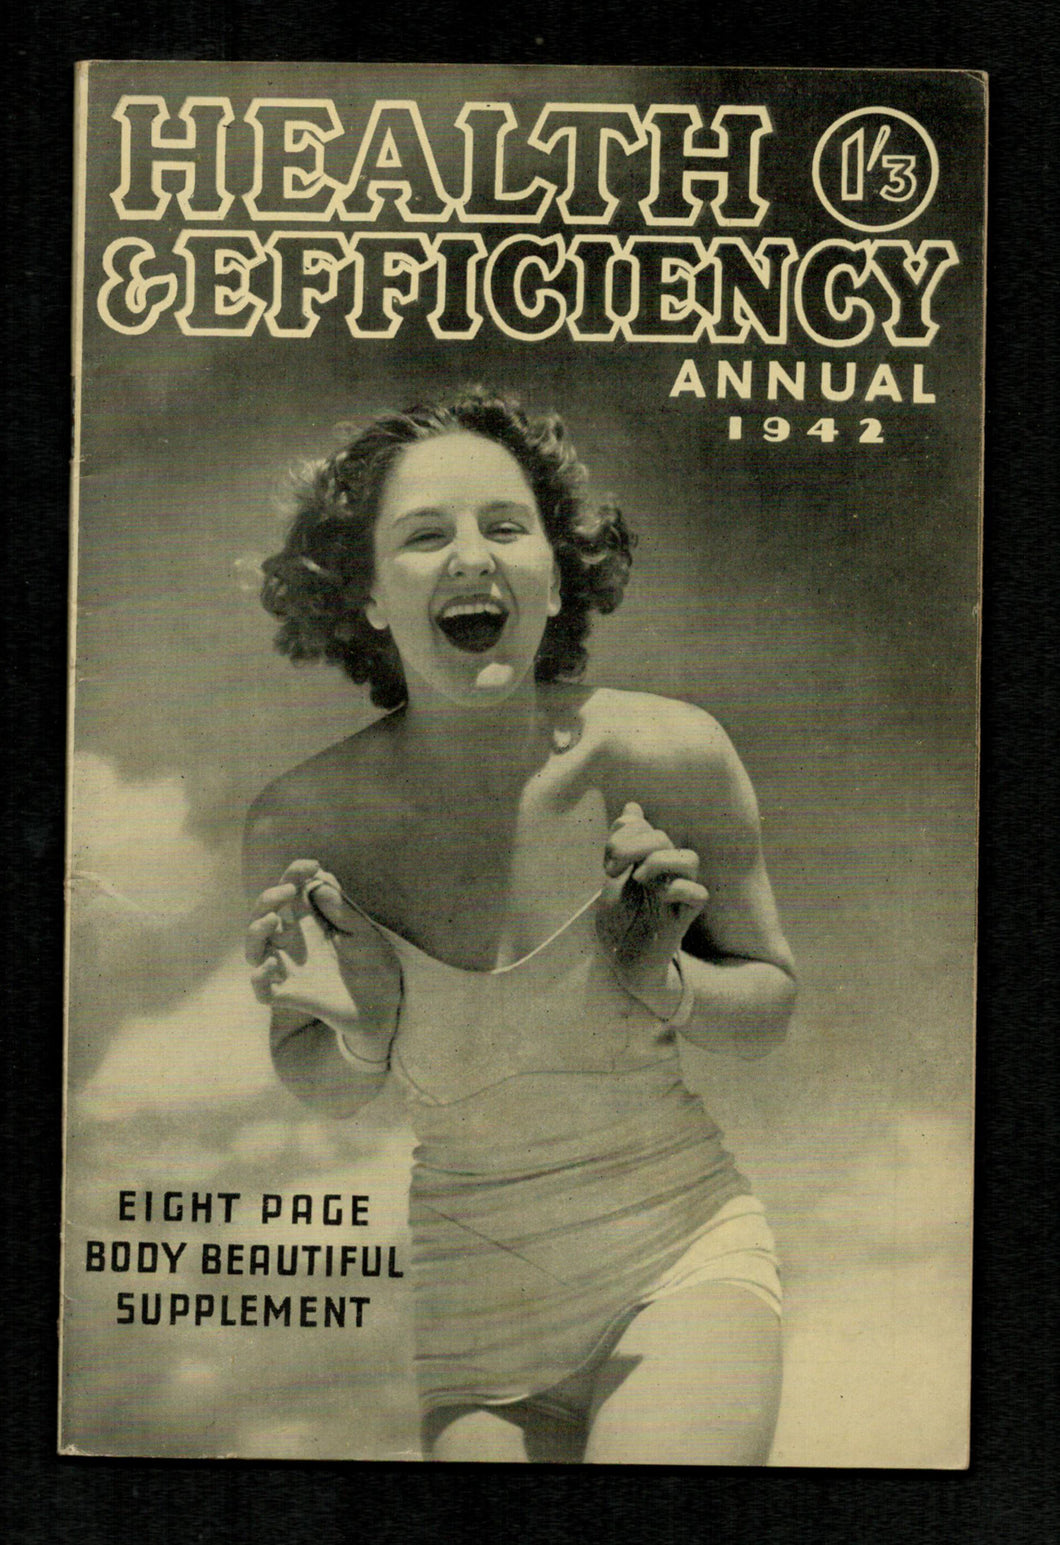 Health and Efficiency Annual 1942